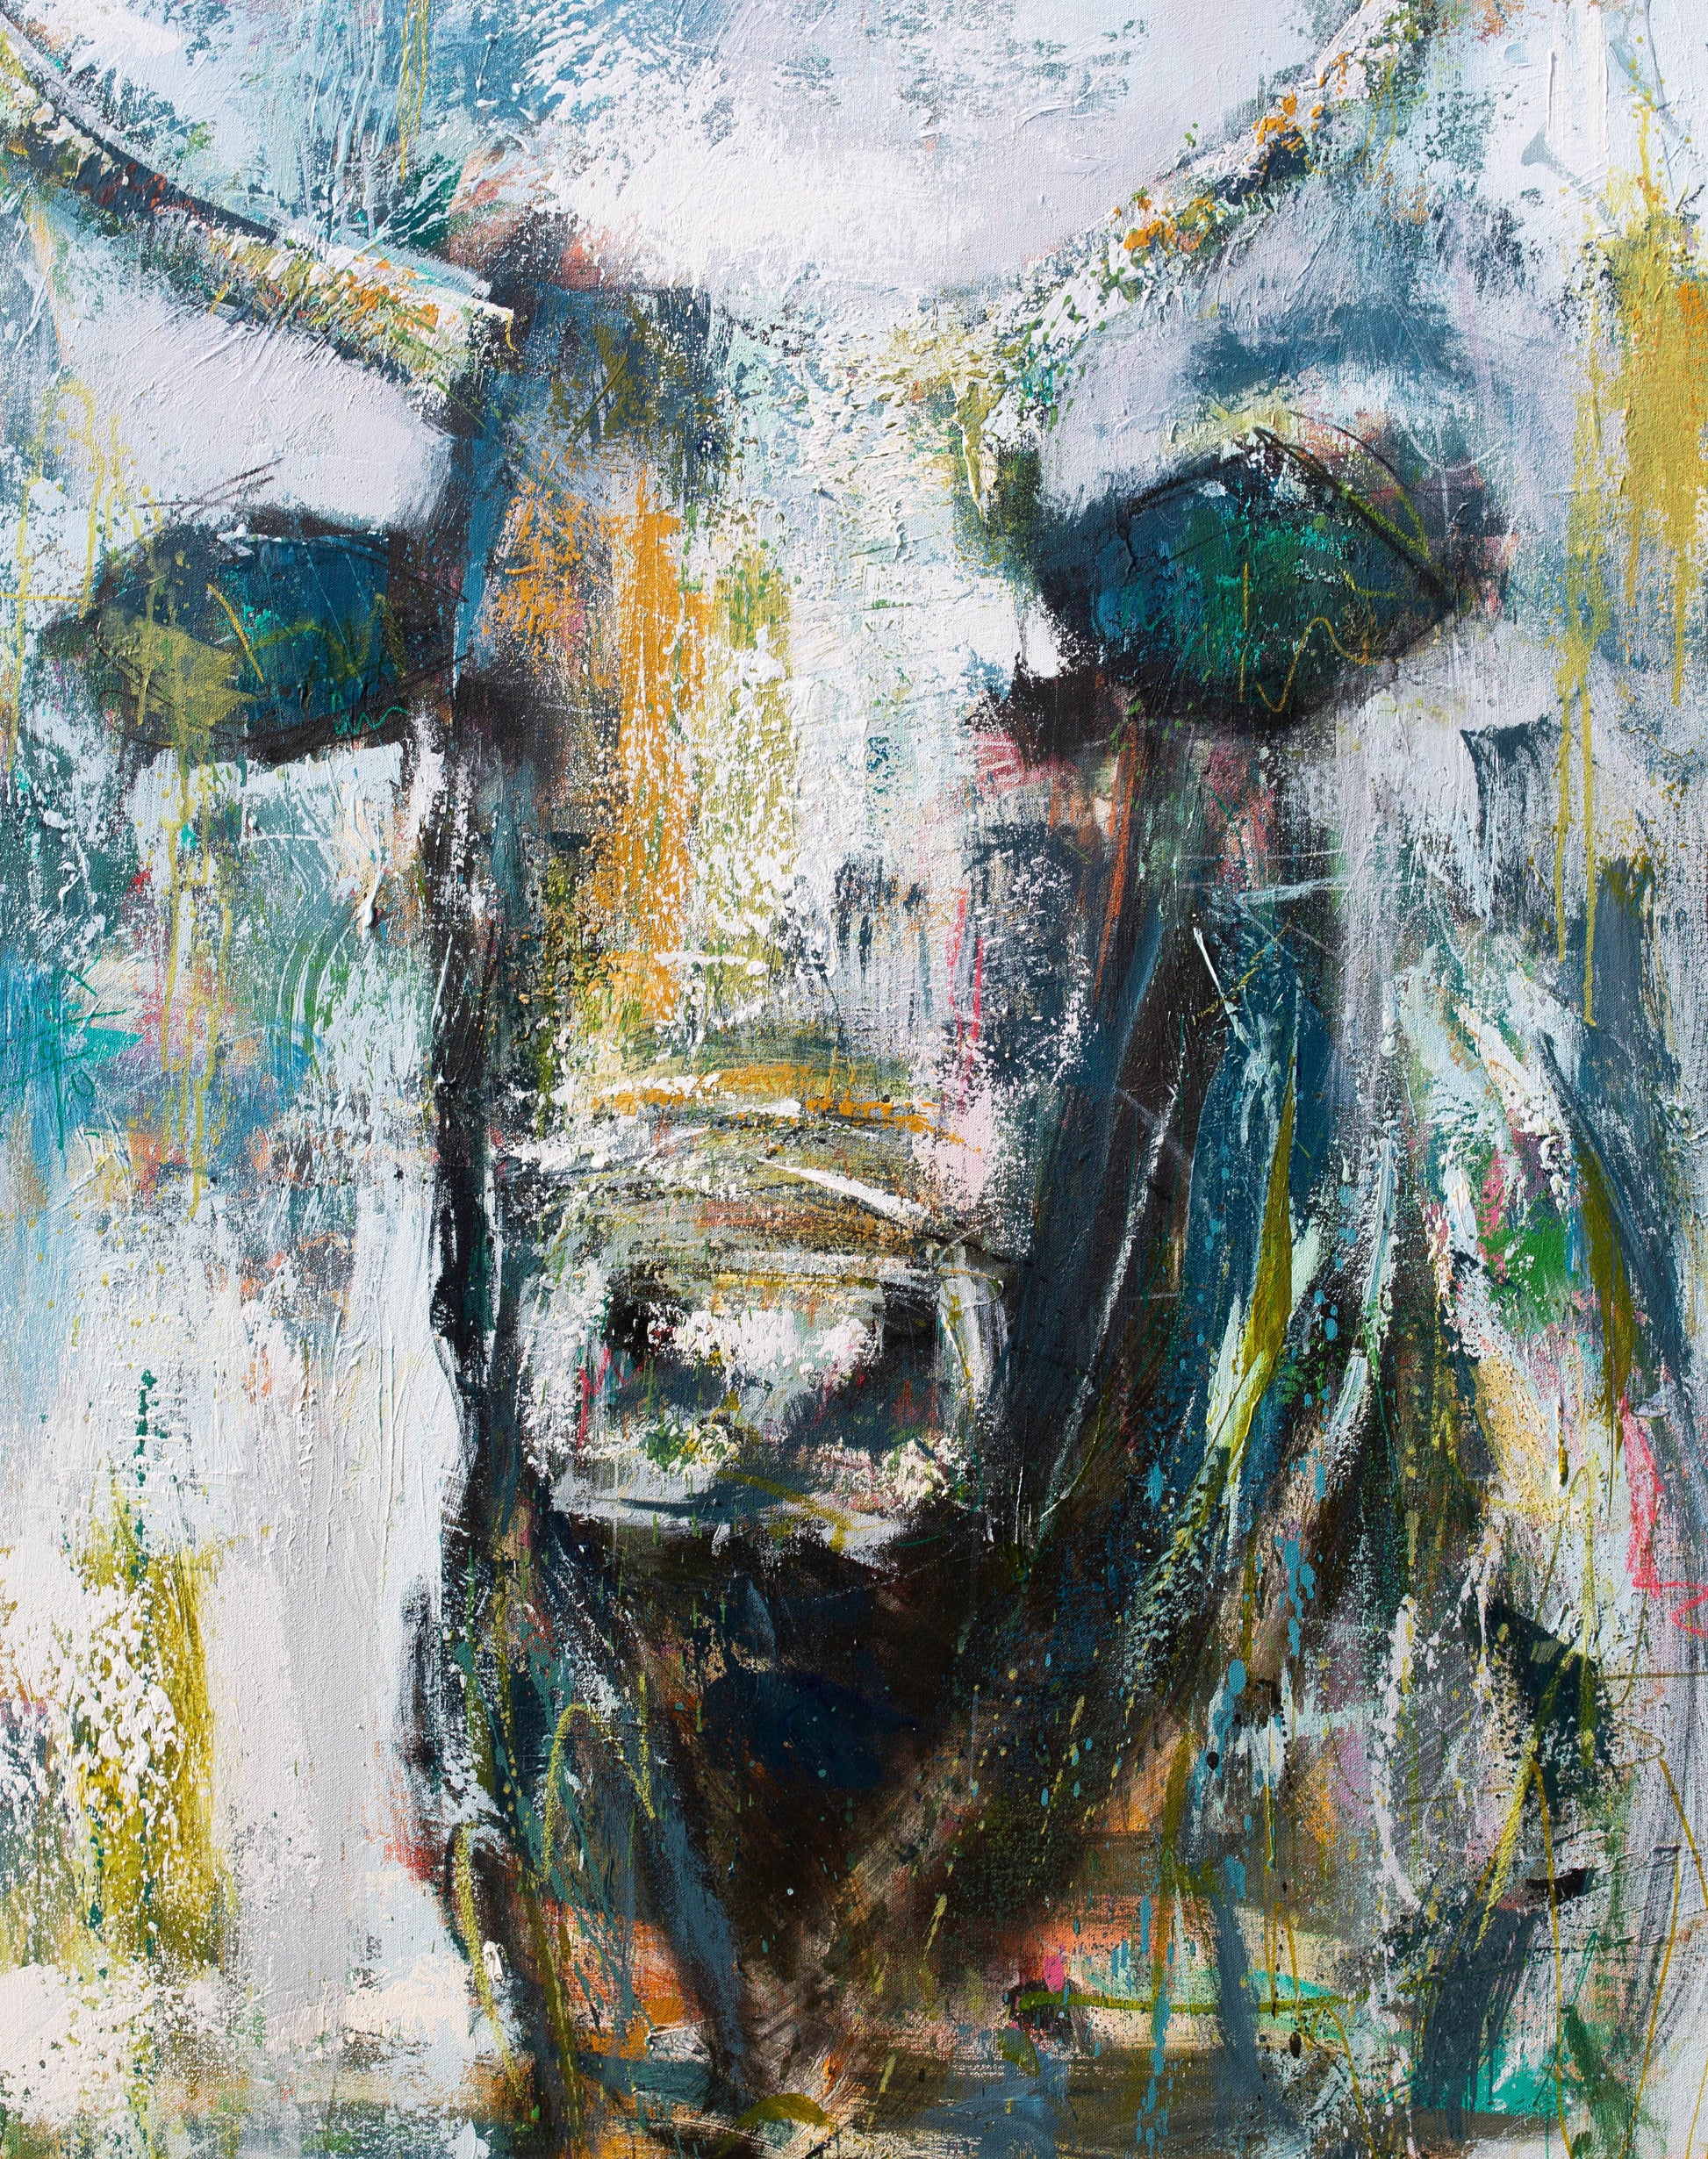 Harvey - Abstract Cow by Australian Artist Rose Hewartson Original Abstract Painting on Canvas Framed 96x123 cm Statement Piece